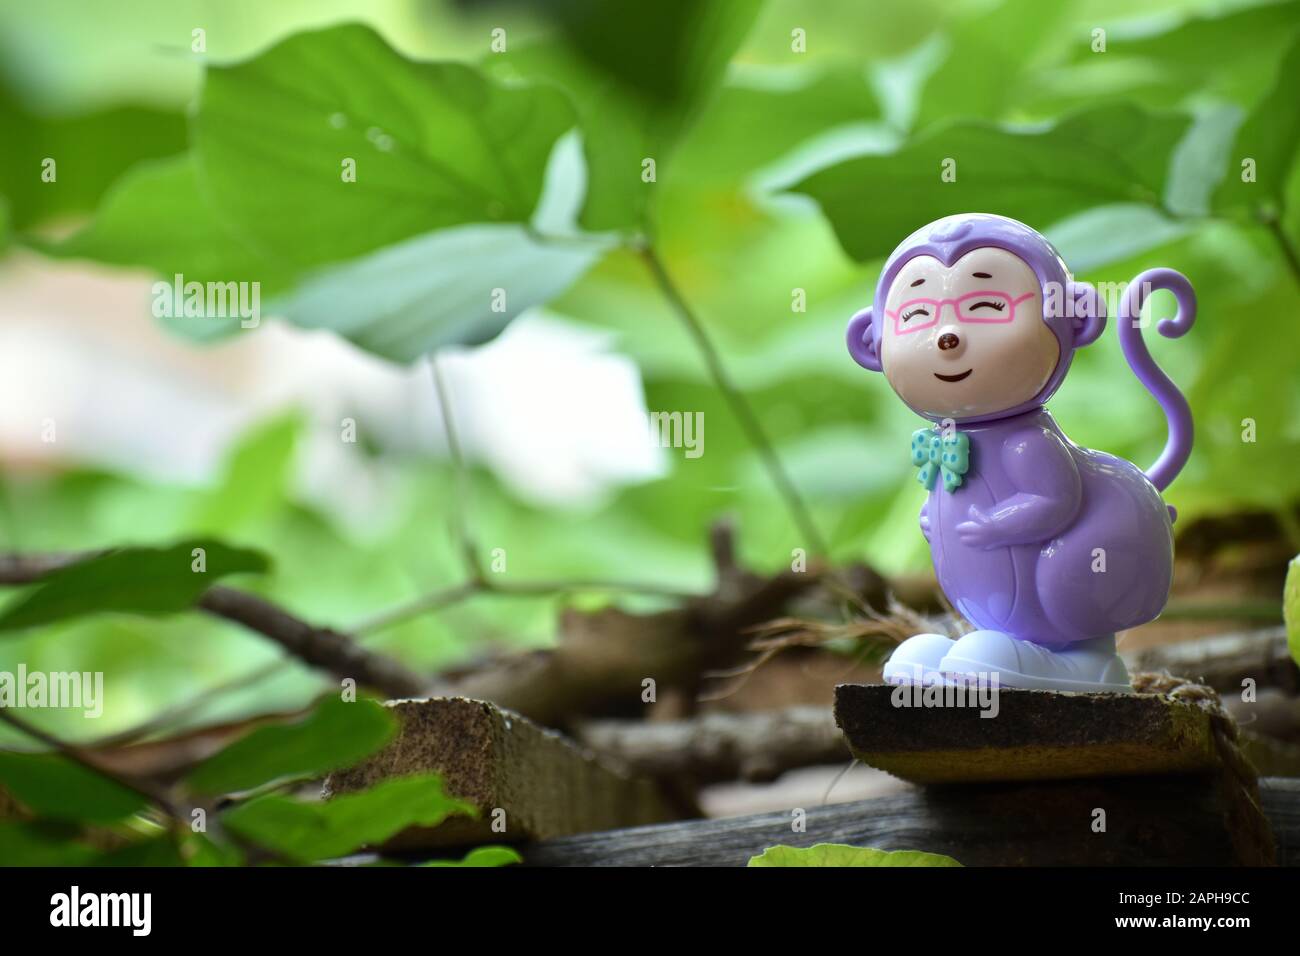 Portrait of a smiling monkey toy with greenish background and blurred leafs Stock Photo